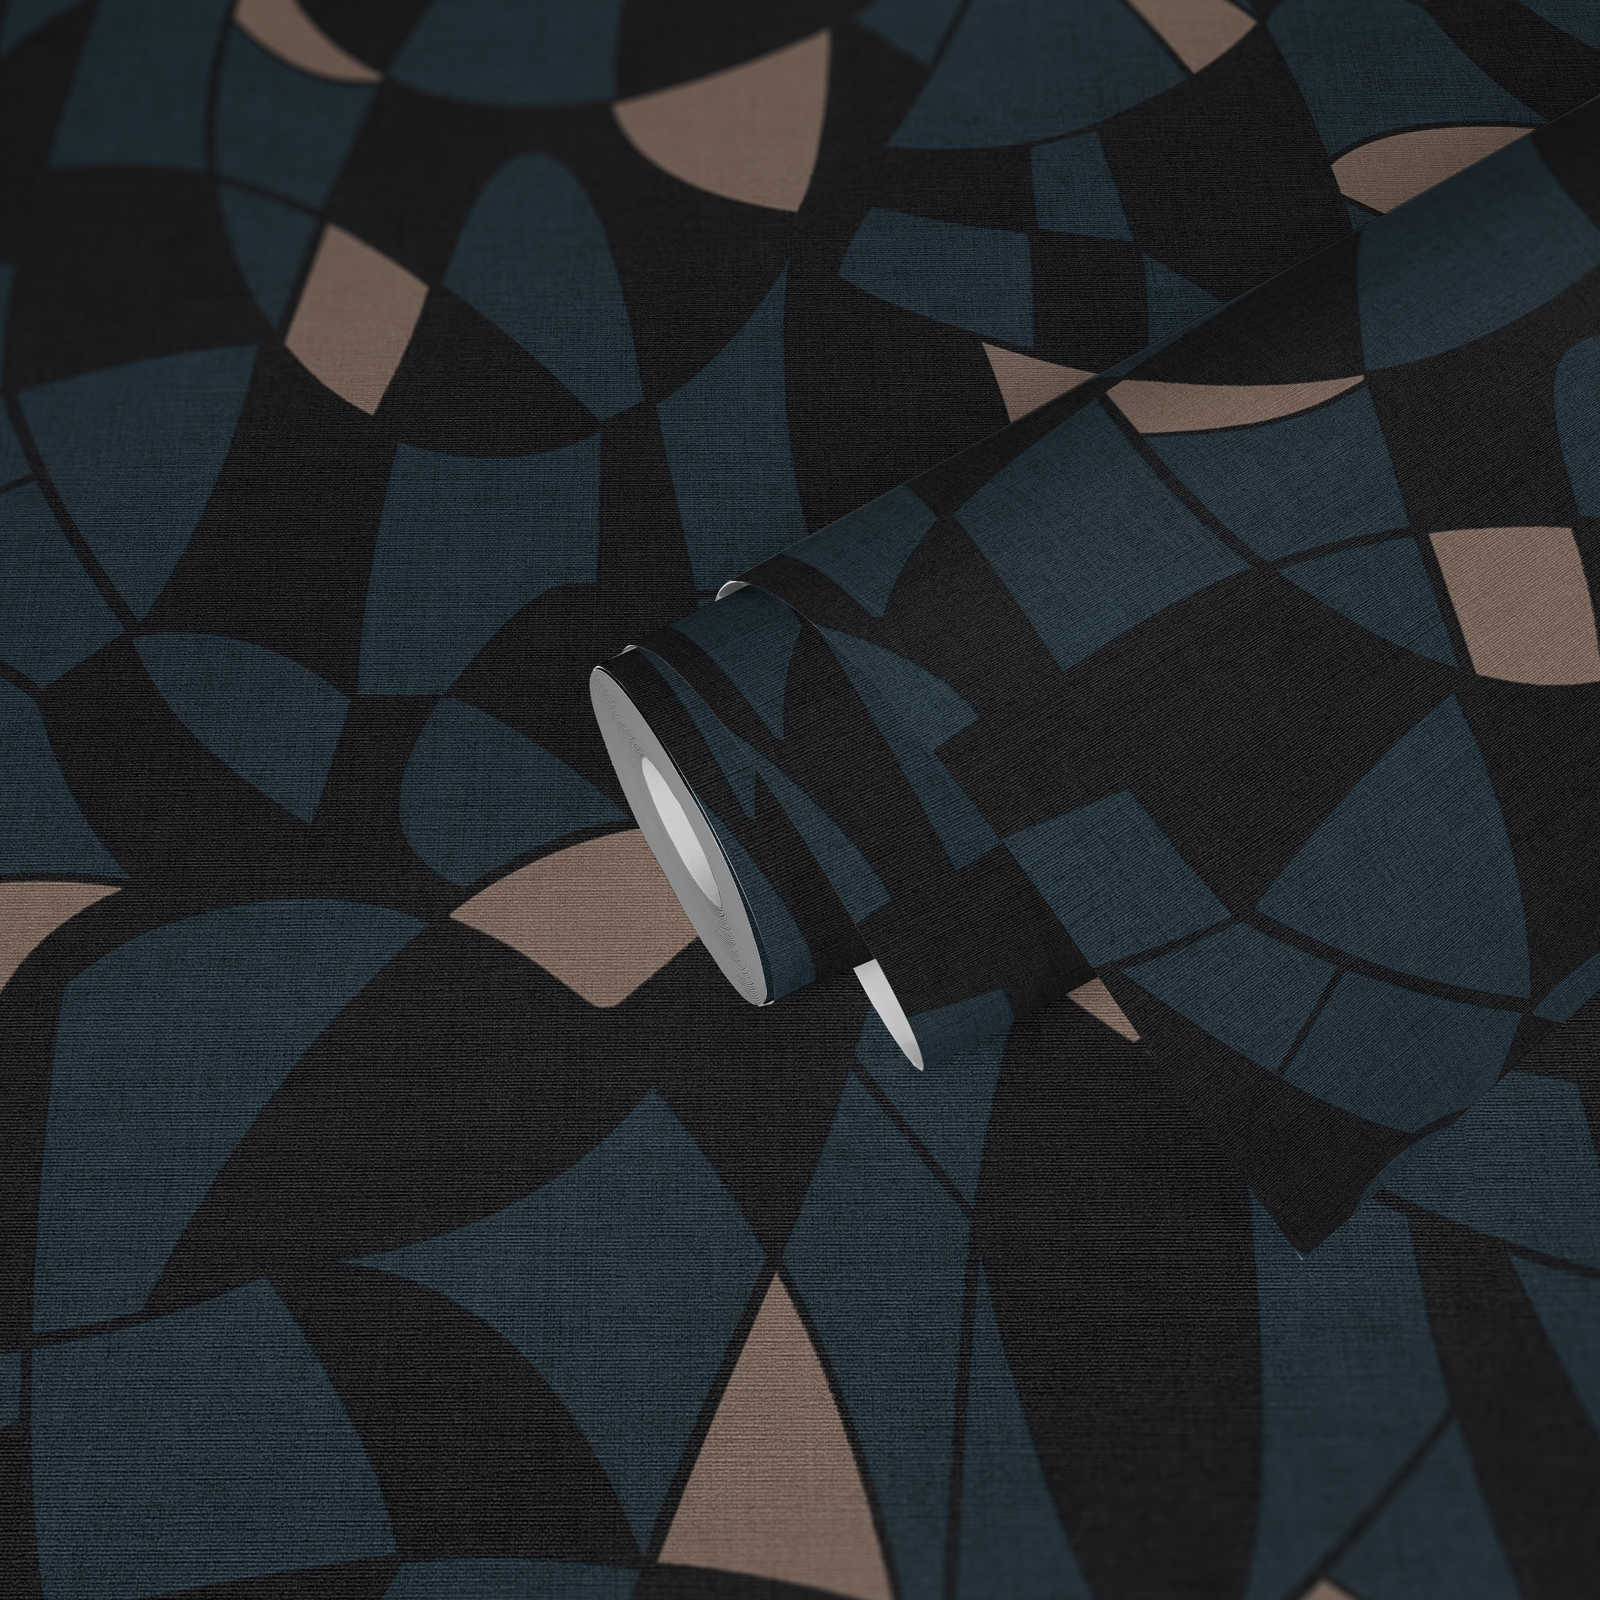             Non-woven wallpaper in dark colours in an abstract pattern - black, blue, beige
        